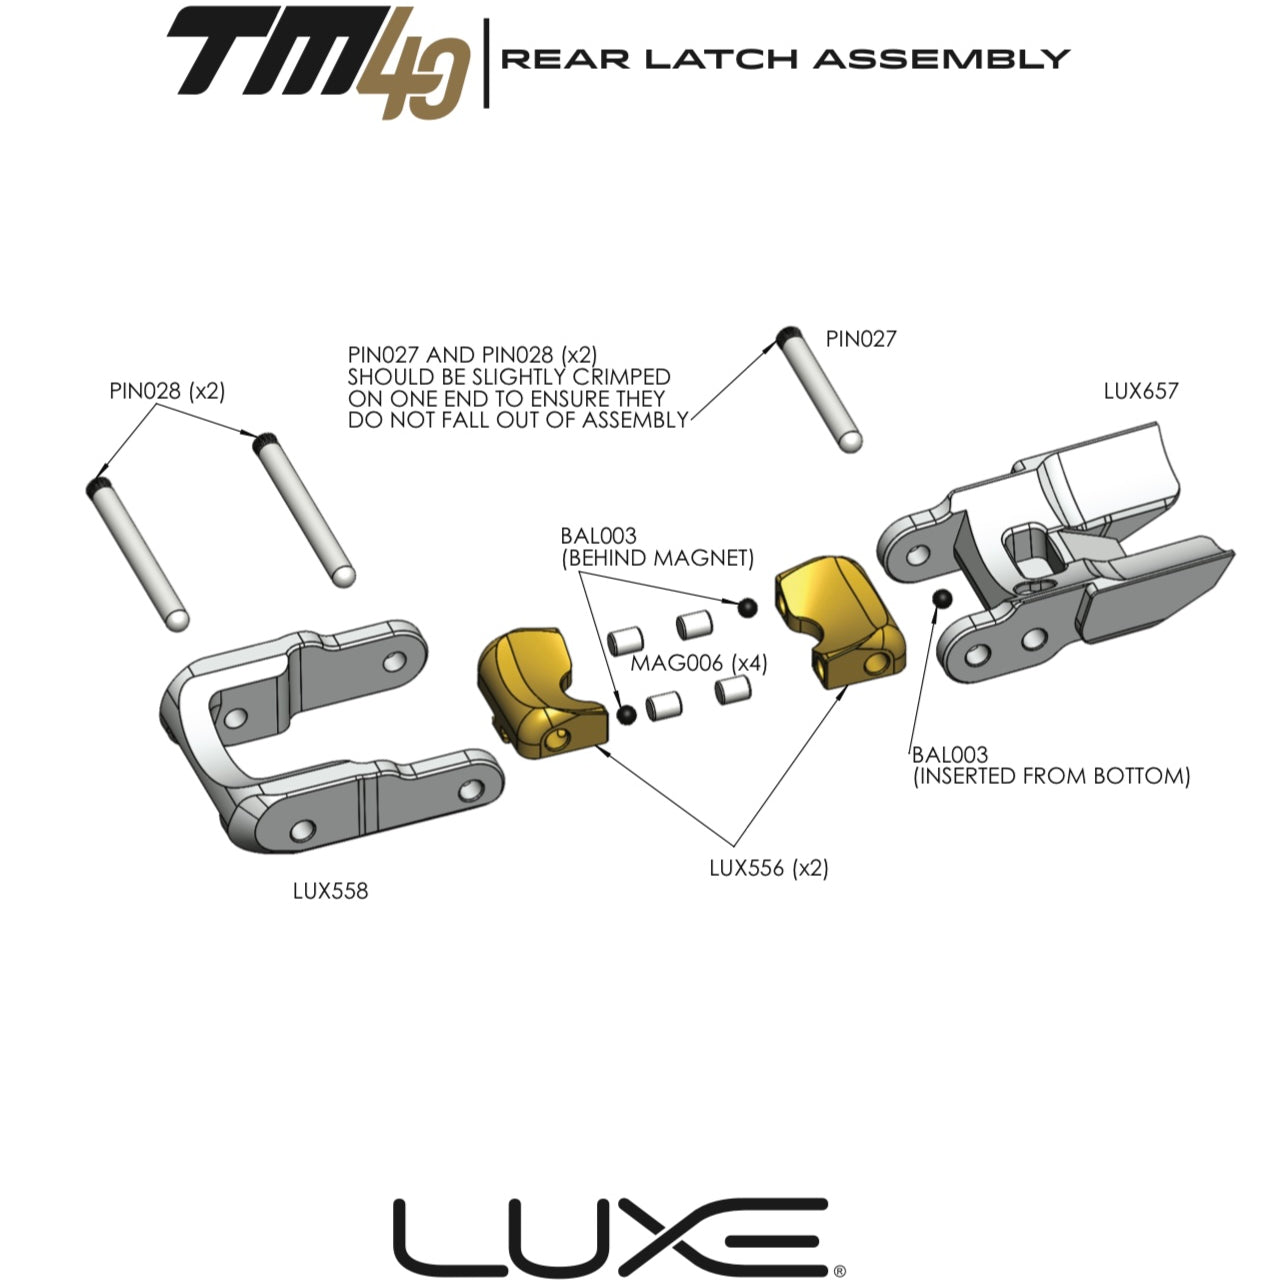 DLX Luxe TM40 Rear Latch System Parts Picker - Pick the Part You Need!